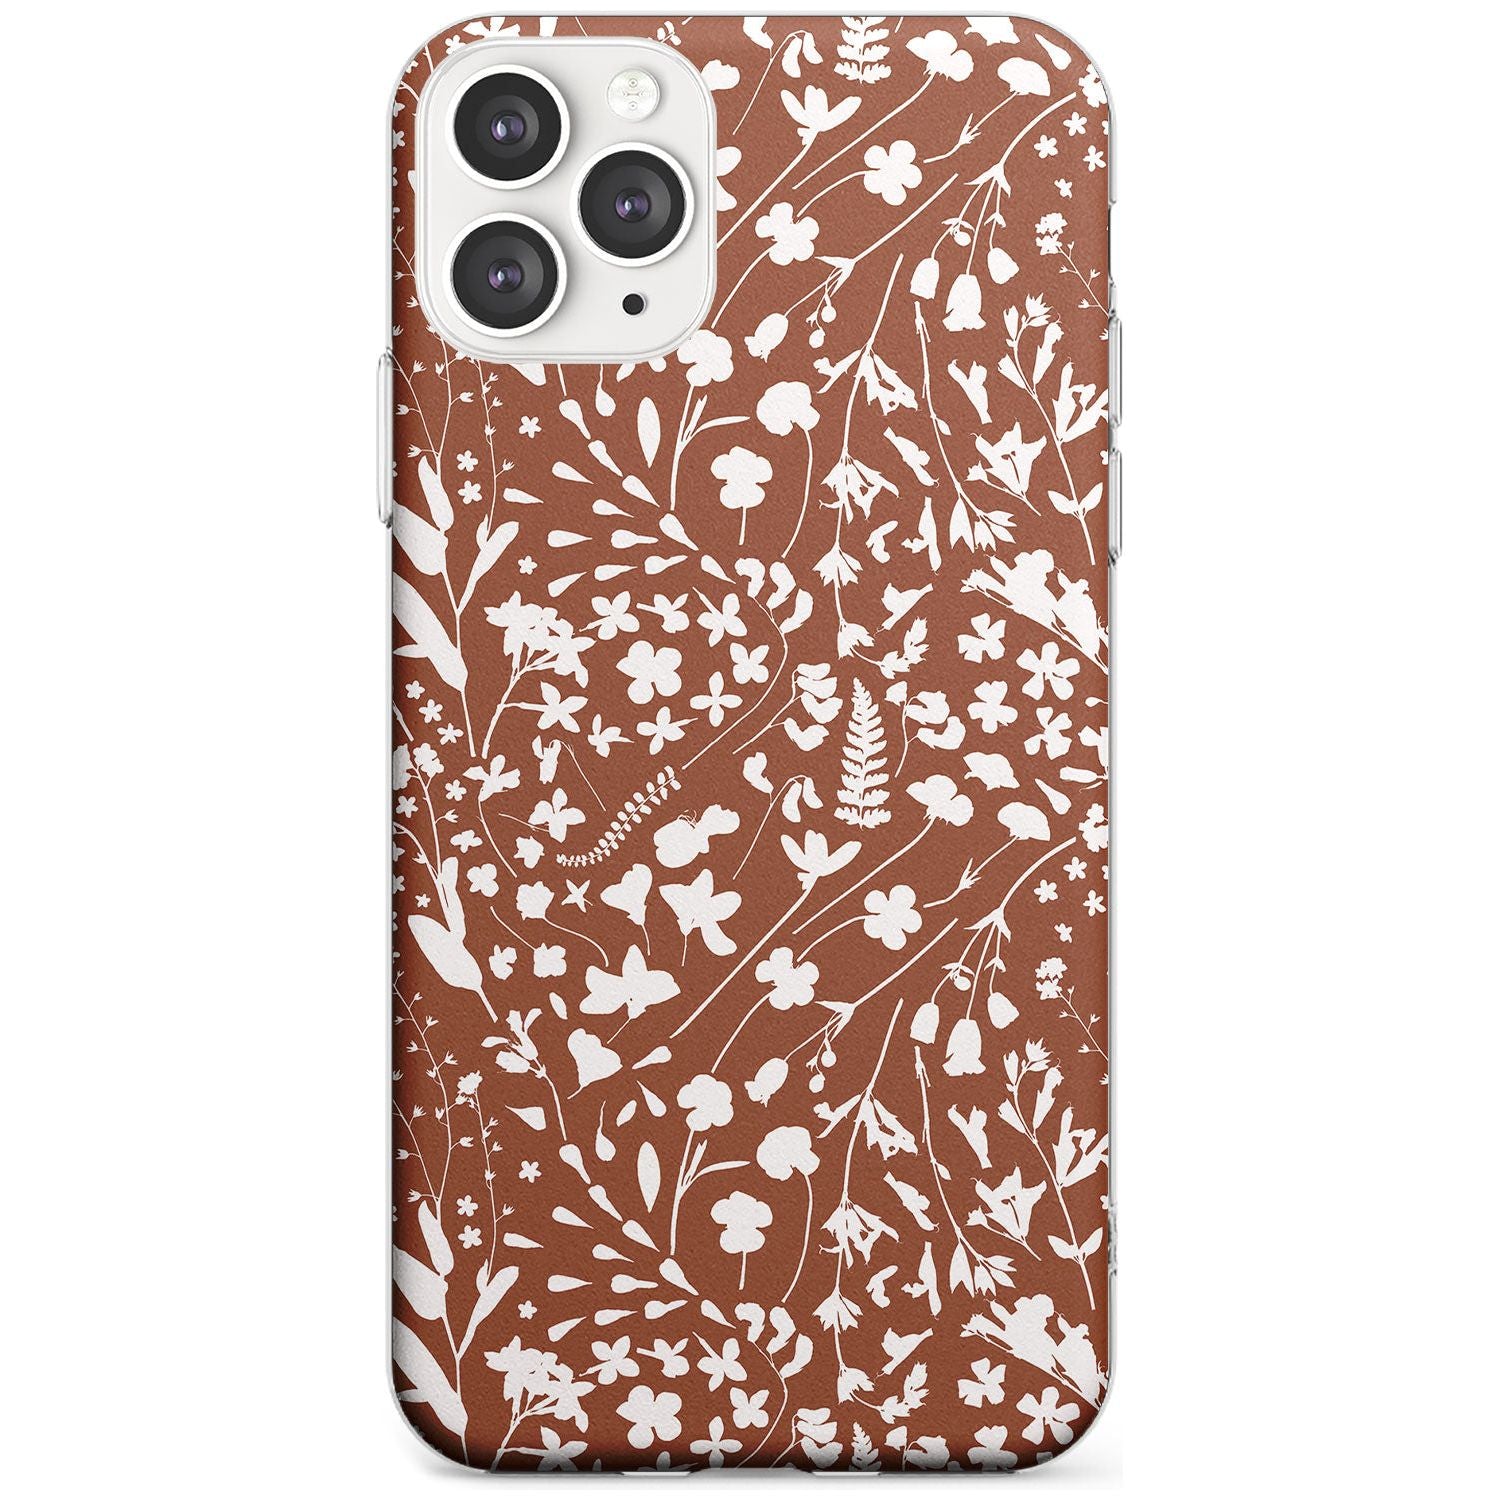 Wildflower Cluster on Terracotta Slim TPU Phone Case for iPhone 11 Pro Max